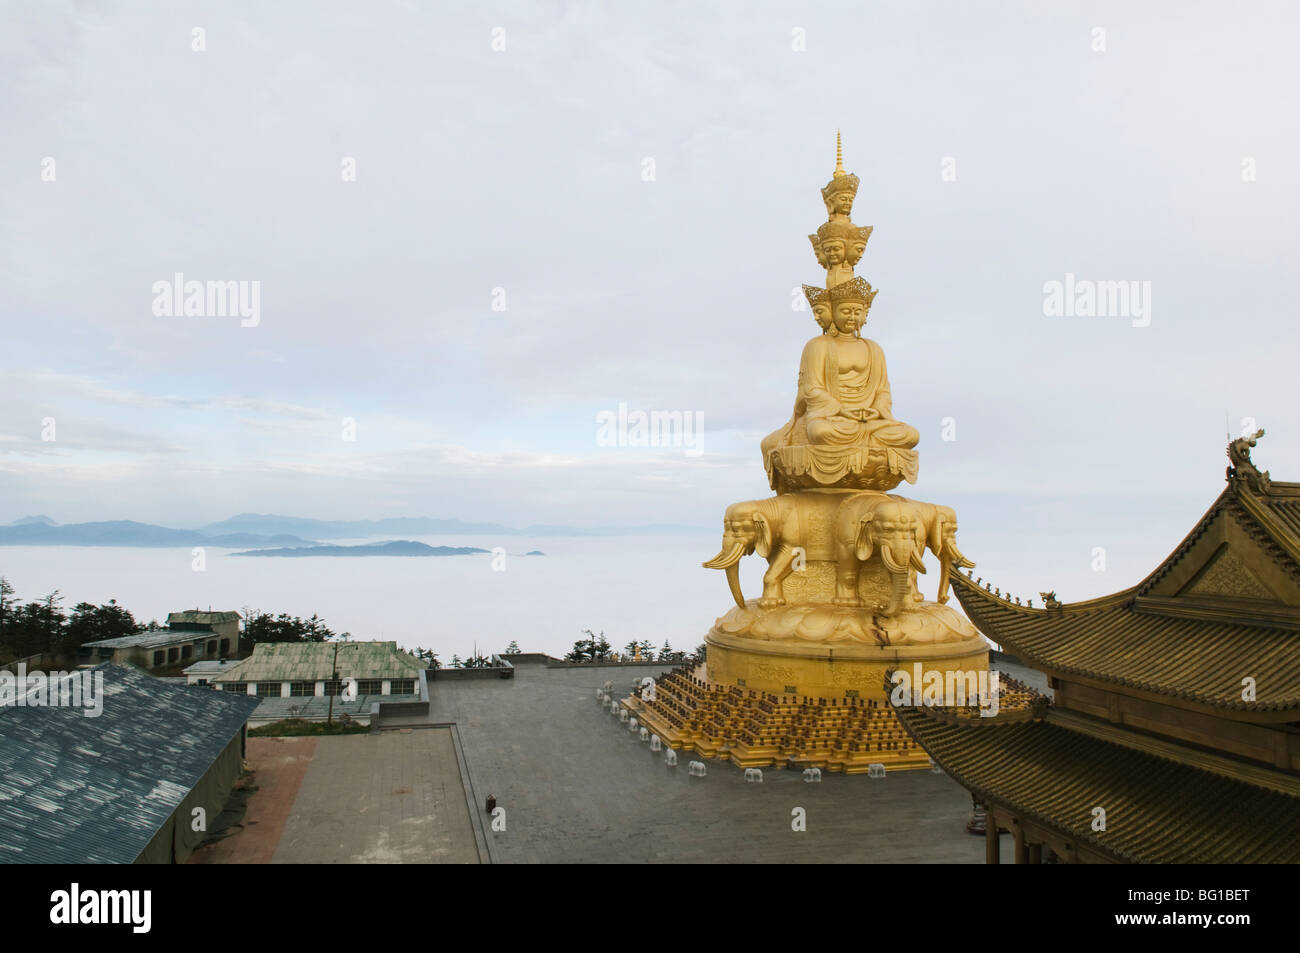 Jinding temple on the top of Golden Summit on Mount Emei Shan, Mount Emei Scenic Area, UNESCO, Sichuan Province, China Stock Photo